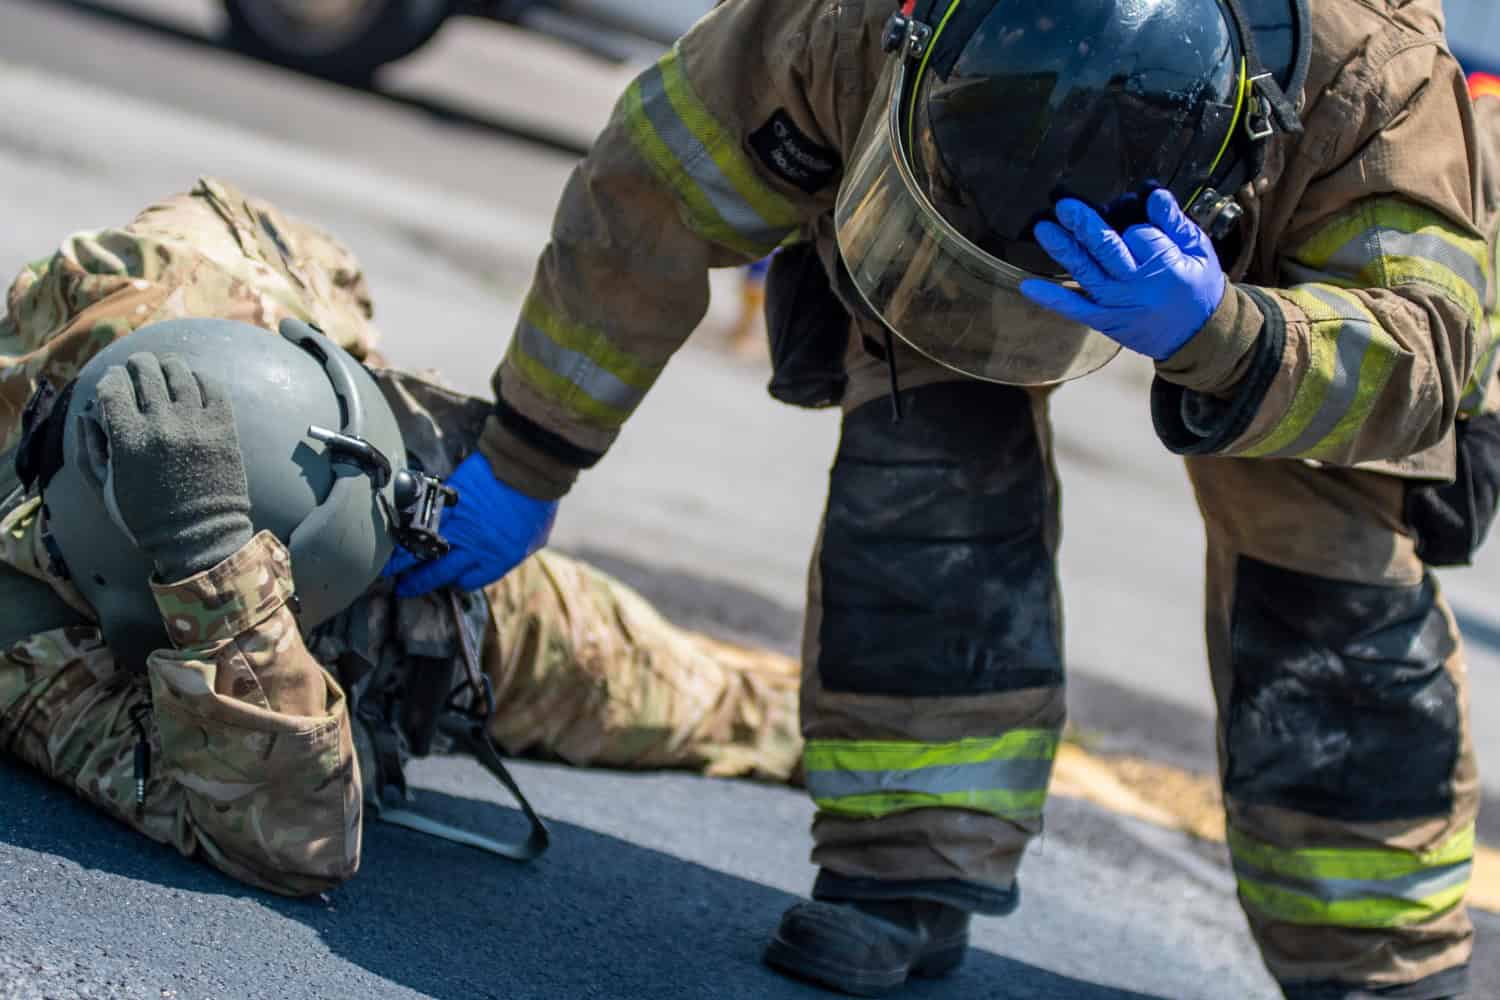 A fire fighter with the Tulsa, Oklahoma Fire Department checks the status of a simulated casualty played by an Oklahoma Army National Guard Citizen-Soldier during pre-accident training at the Oklahoma Army National Guard's Army Aviation Support Facility 2, in an exercise to help prevent military training deaths. 